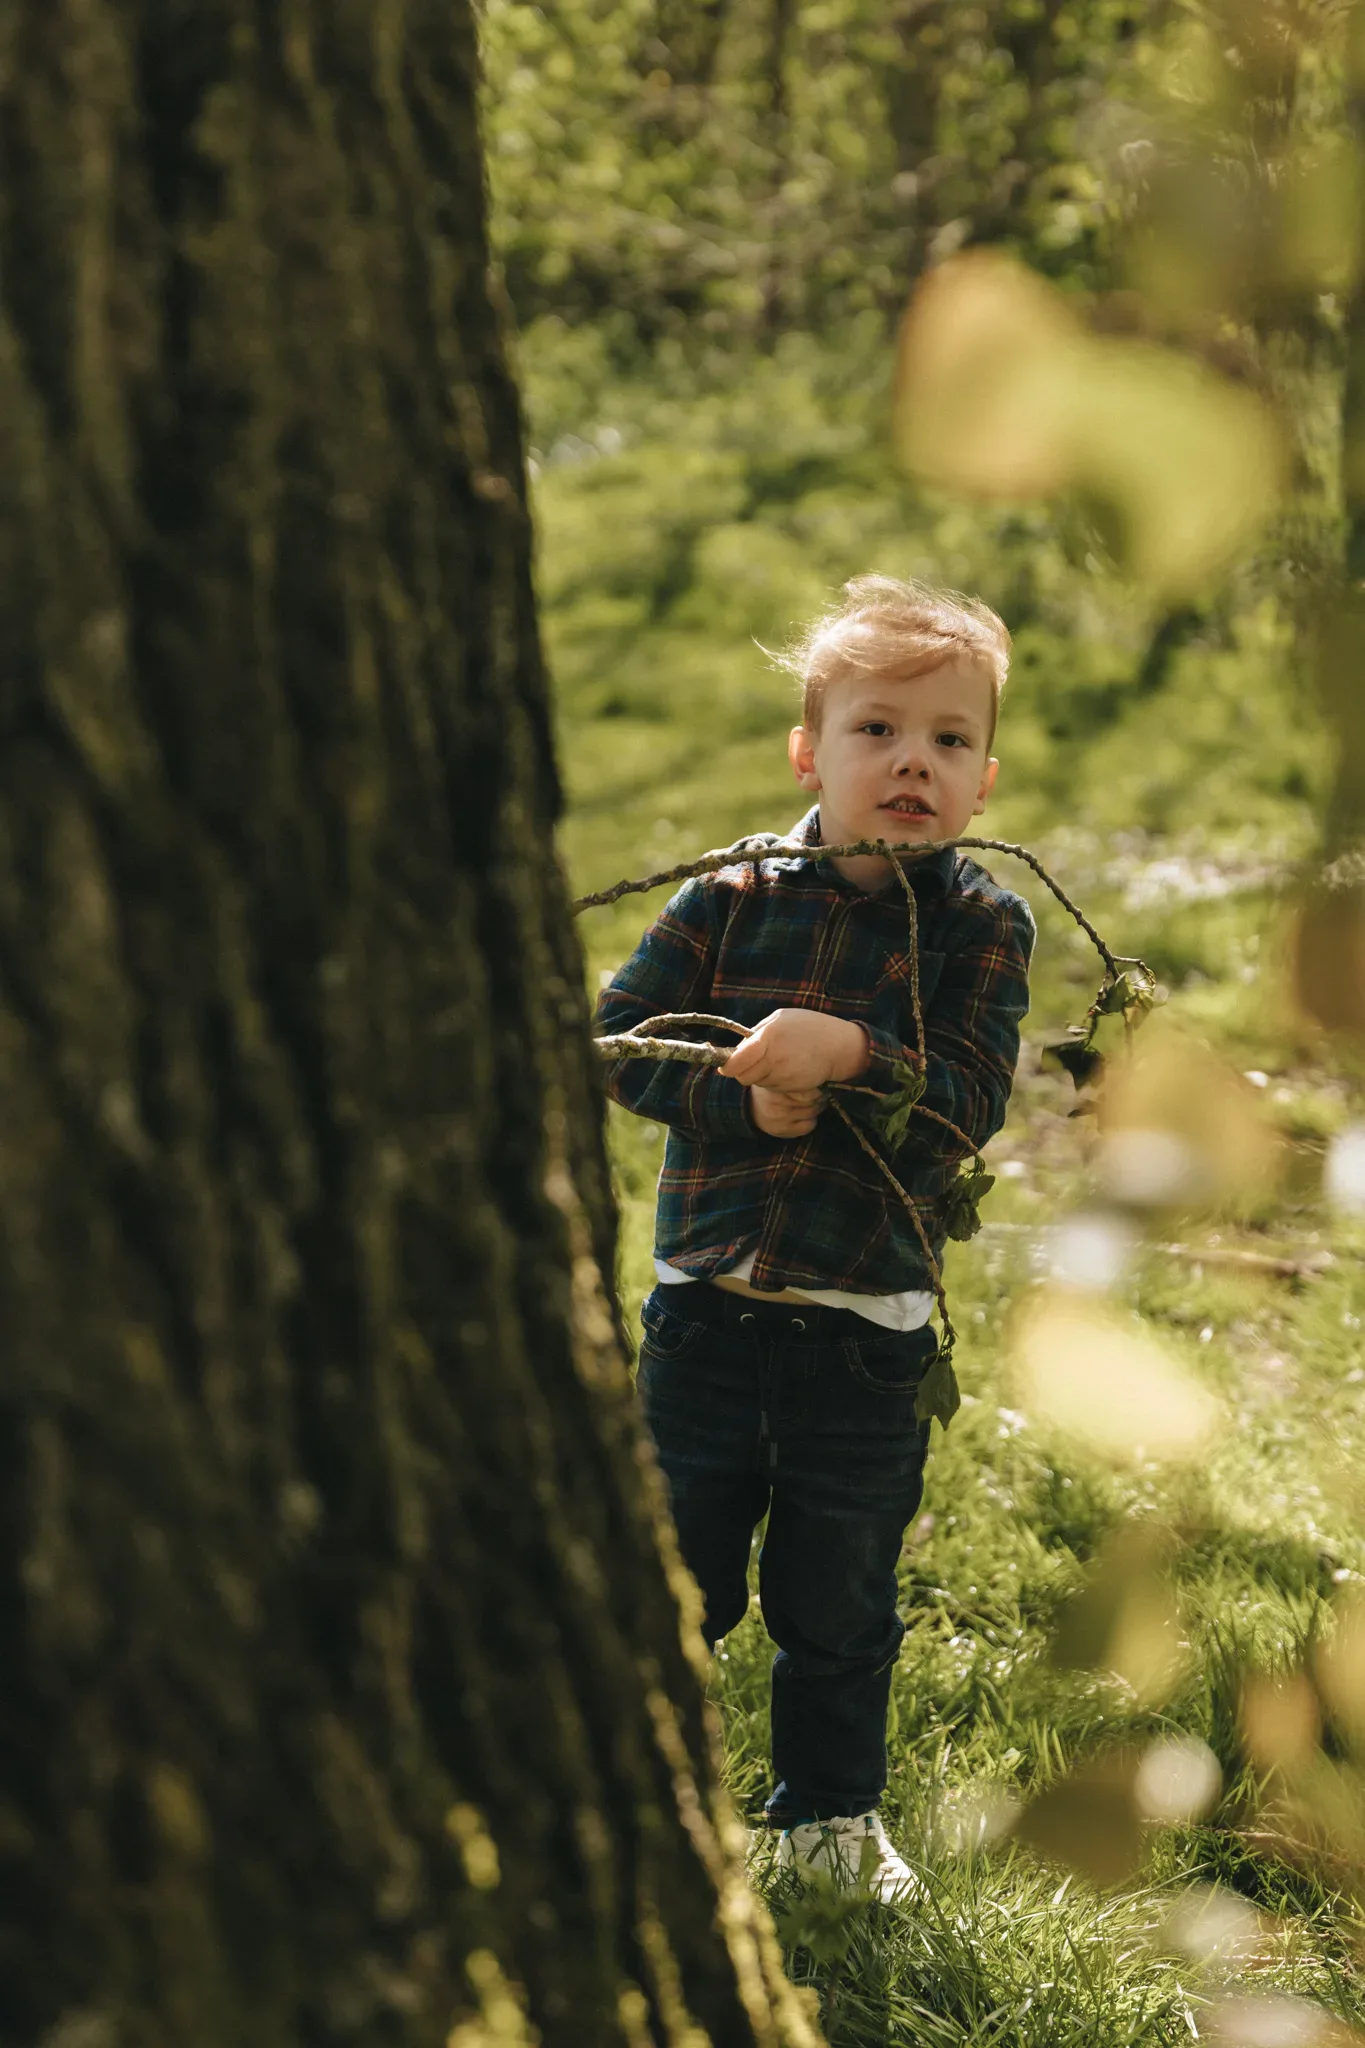 A young boy stands in a sunlit forest, partially obscured by tree trunks. he looks surprised, holding a small branch, and is dressed in a plaid shirt and jeans. bright green leaves frame the scene.